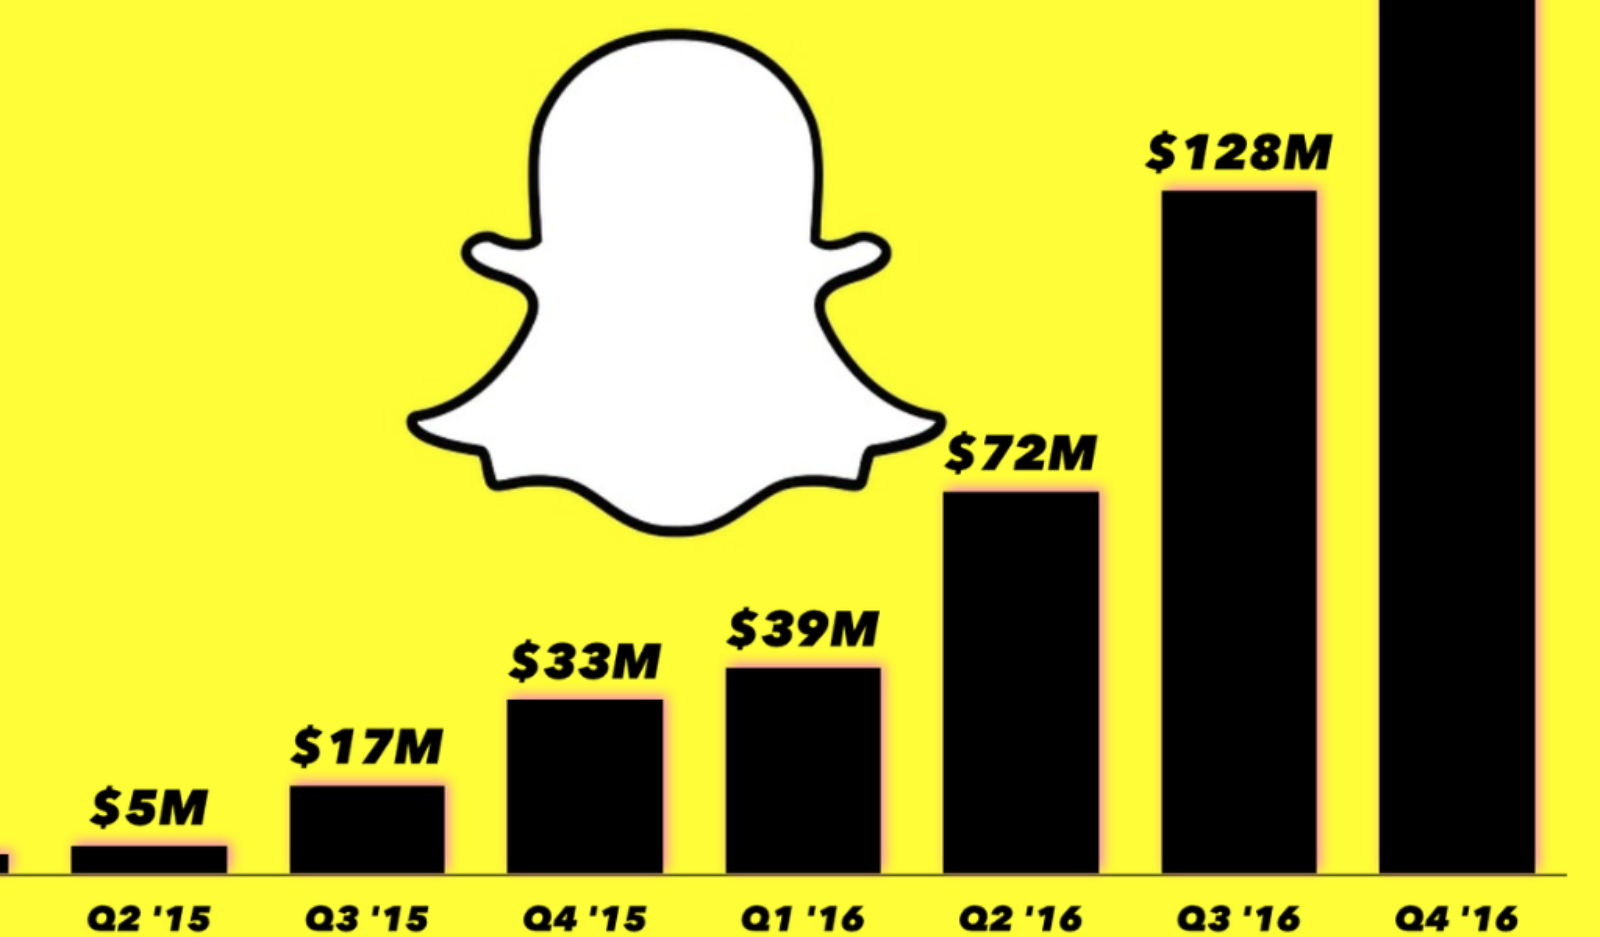 Snap Sees a 64% Increase in Q4, Records Fastest Revenue Growth Yet!